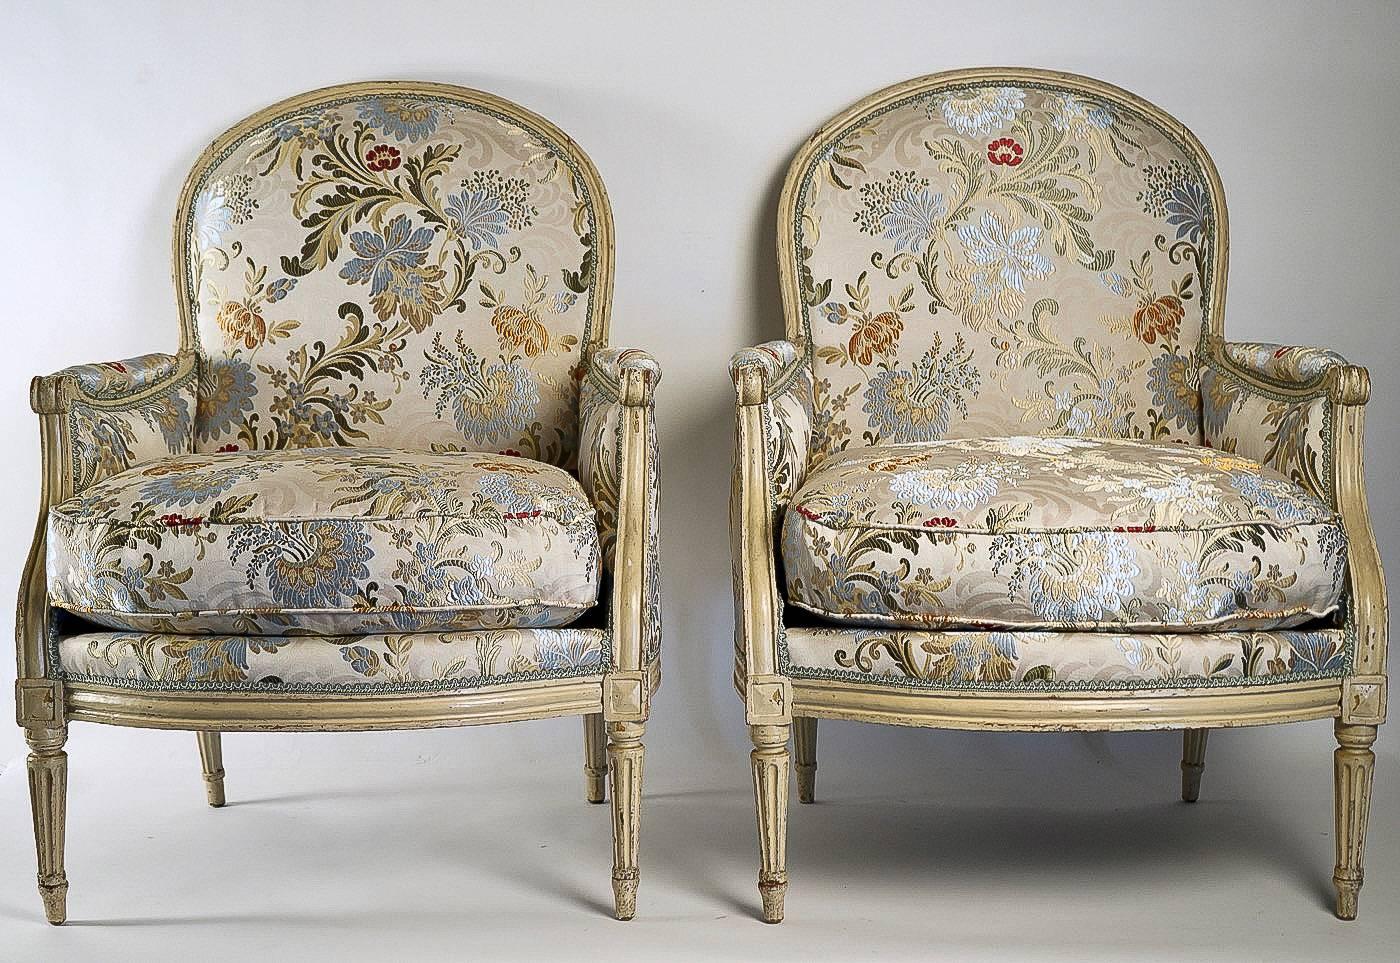 French 18th Century Lacquered Beechwood Four-Piece Salon Suite Louis XVI Period For Sale 1